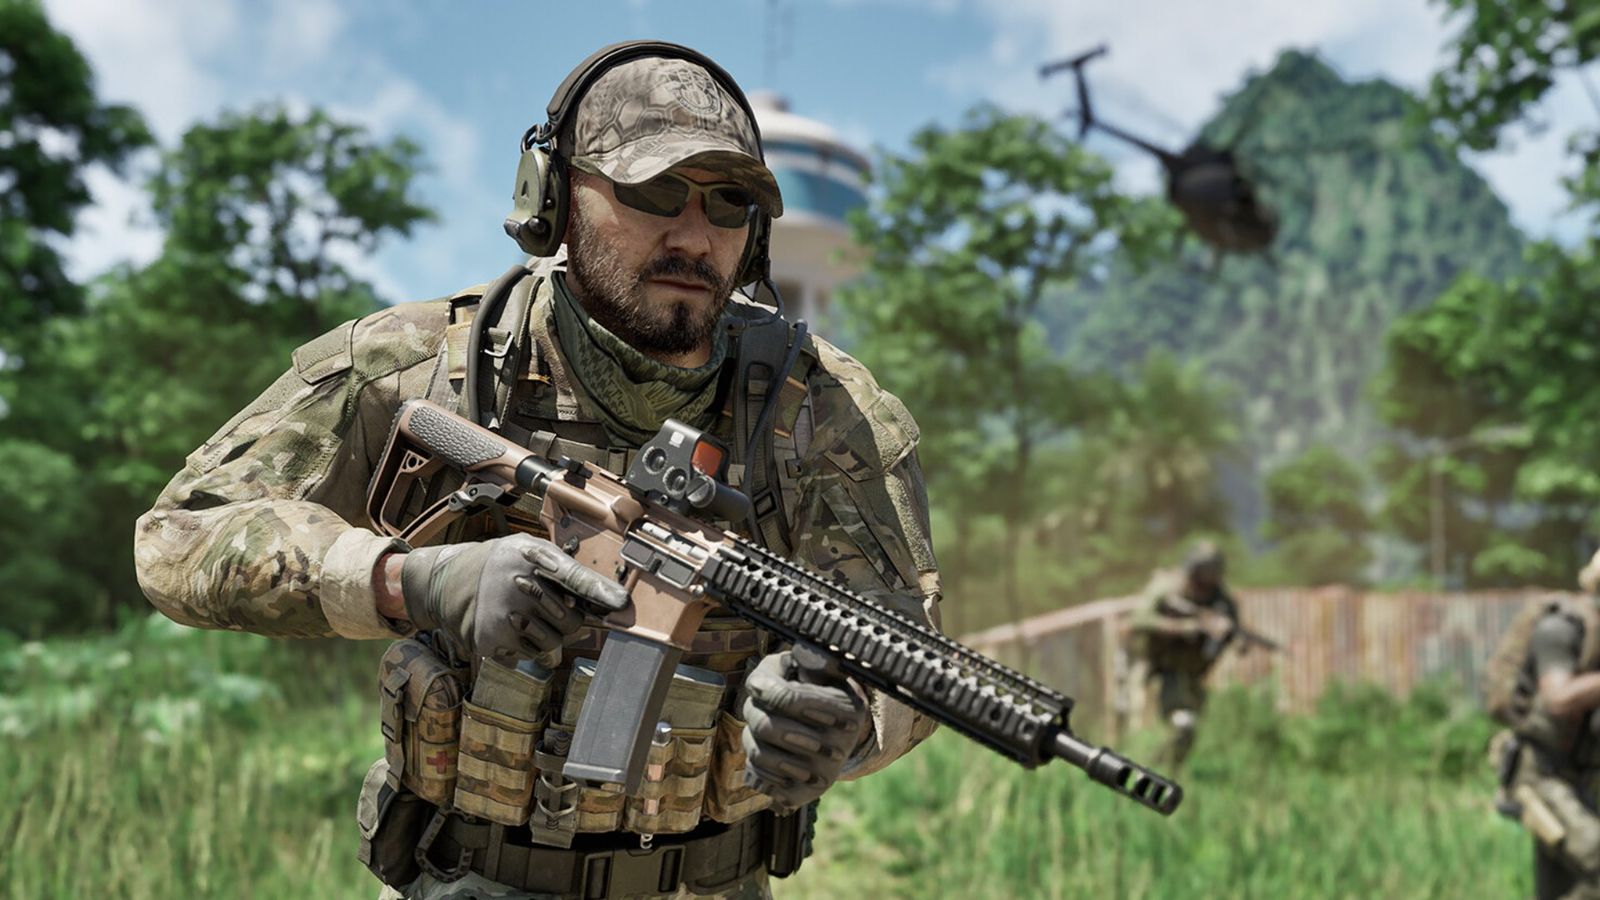 Gray Zone Warfare Leave No Man Behind: A close-up of a soldier wearing tactical gear and holding a rifle at the ready, while other soldiers walk past in the background.